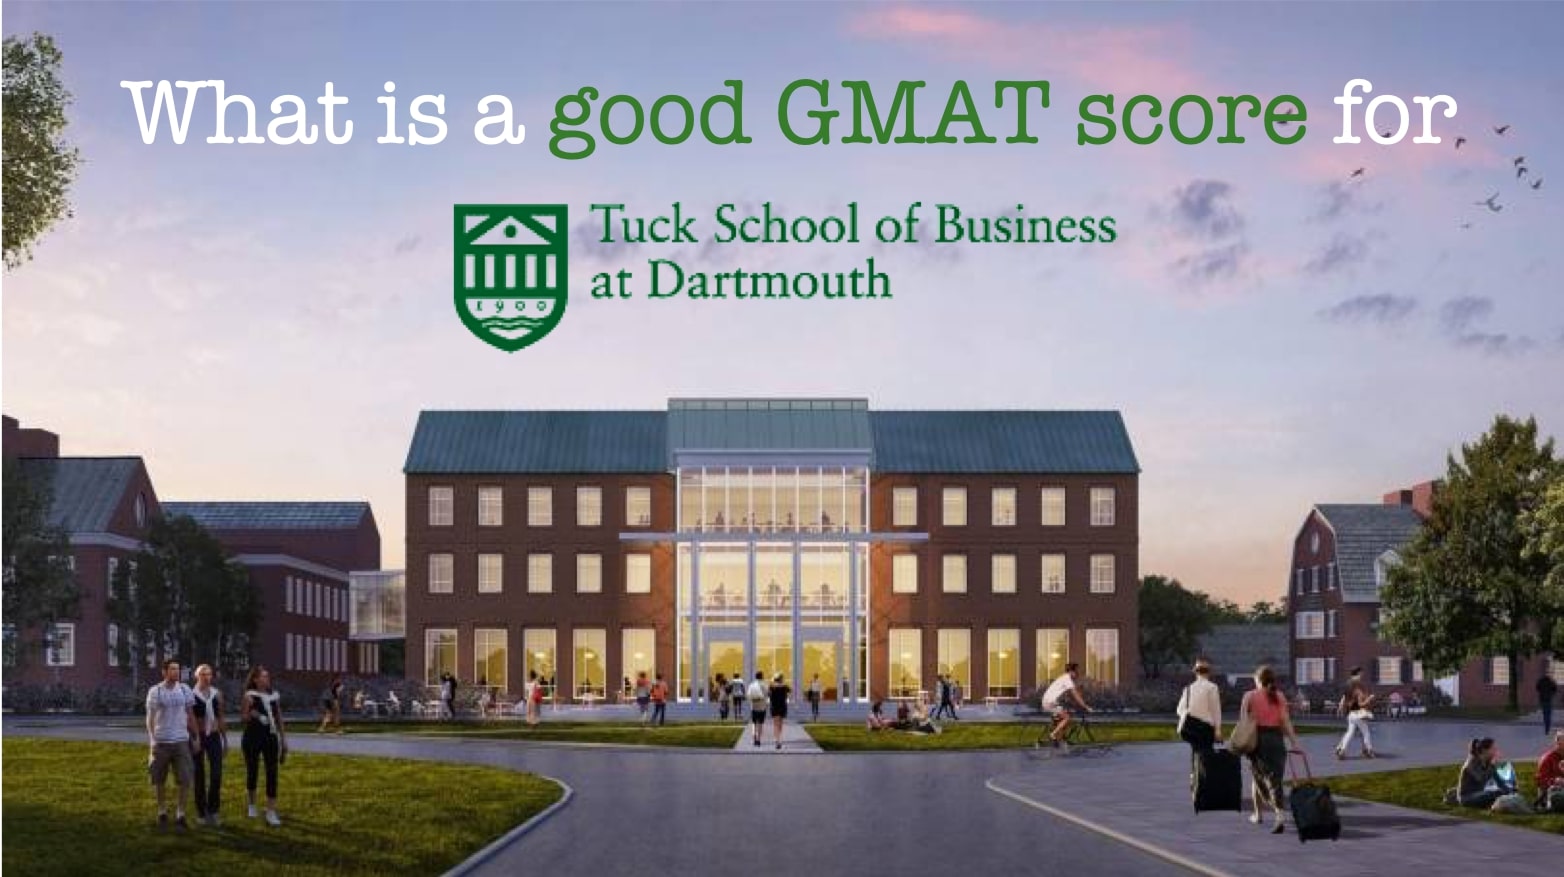 What is a good GMAT score for Dartmouth Tuck